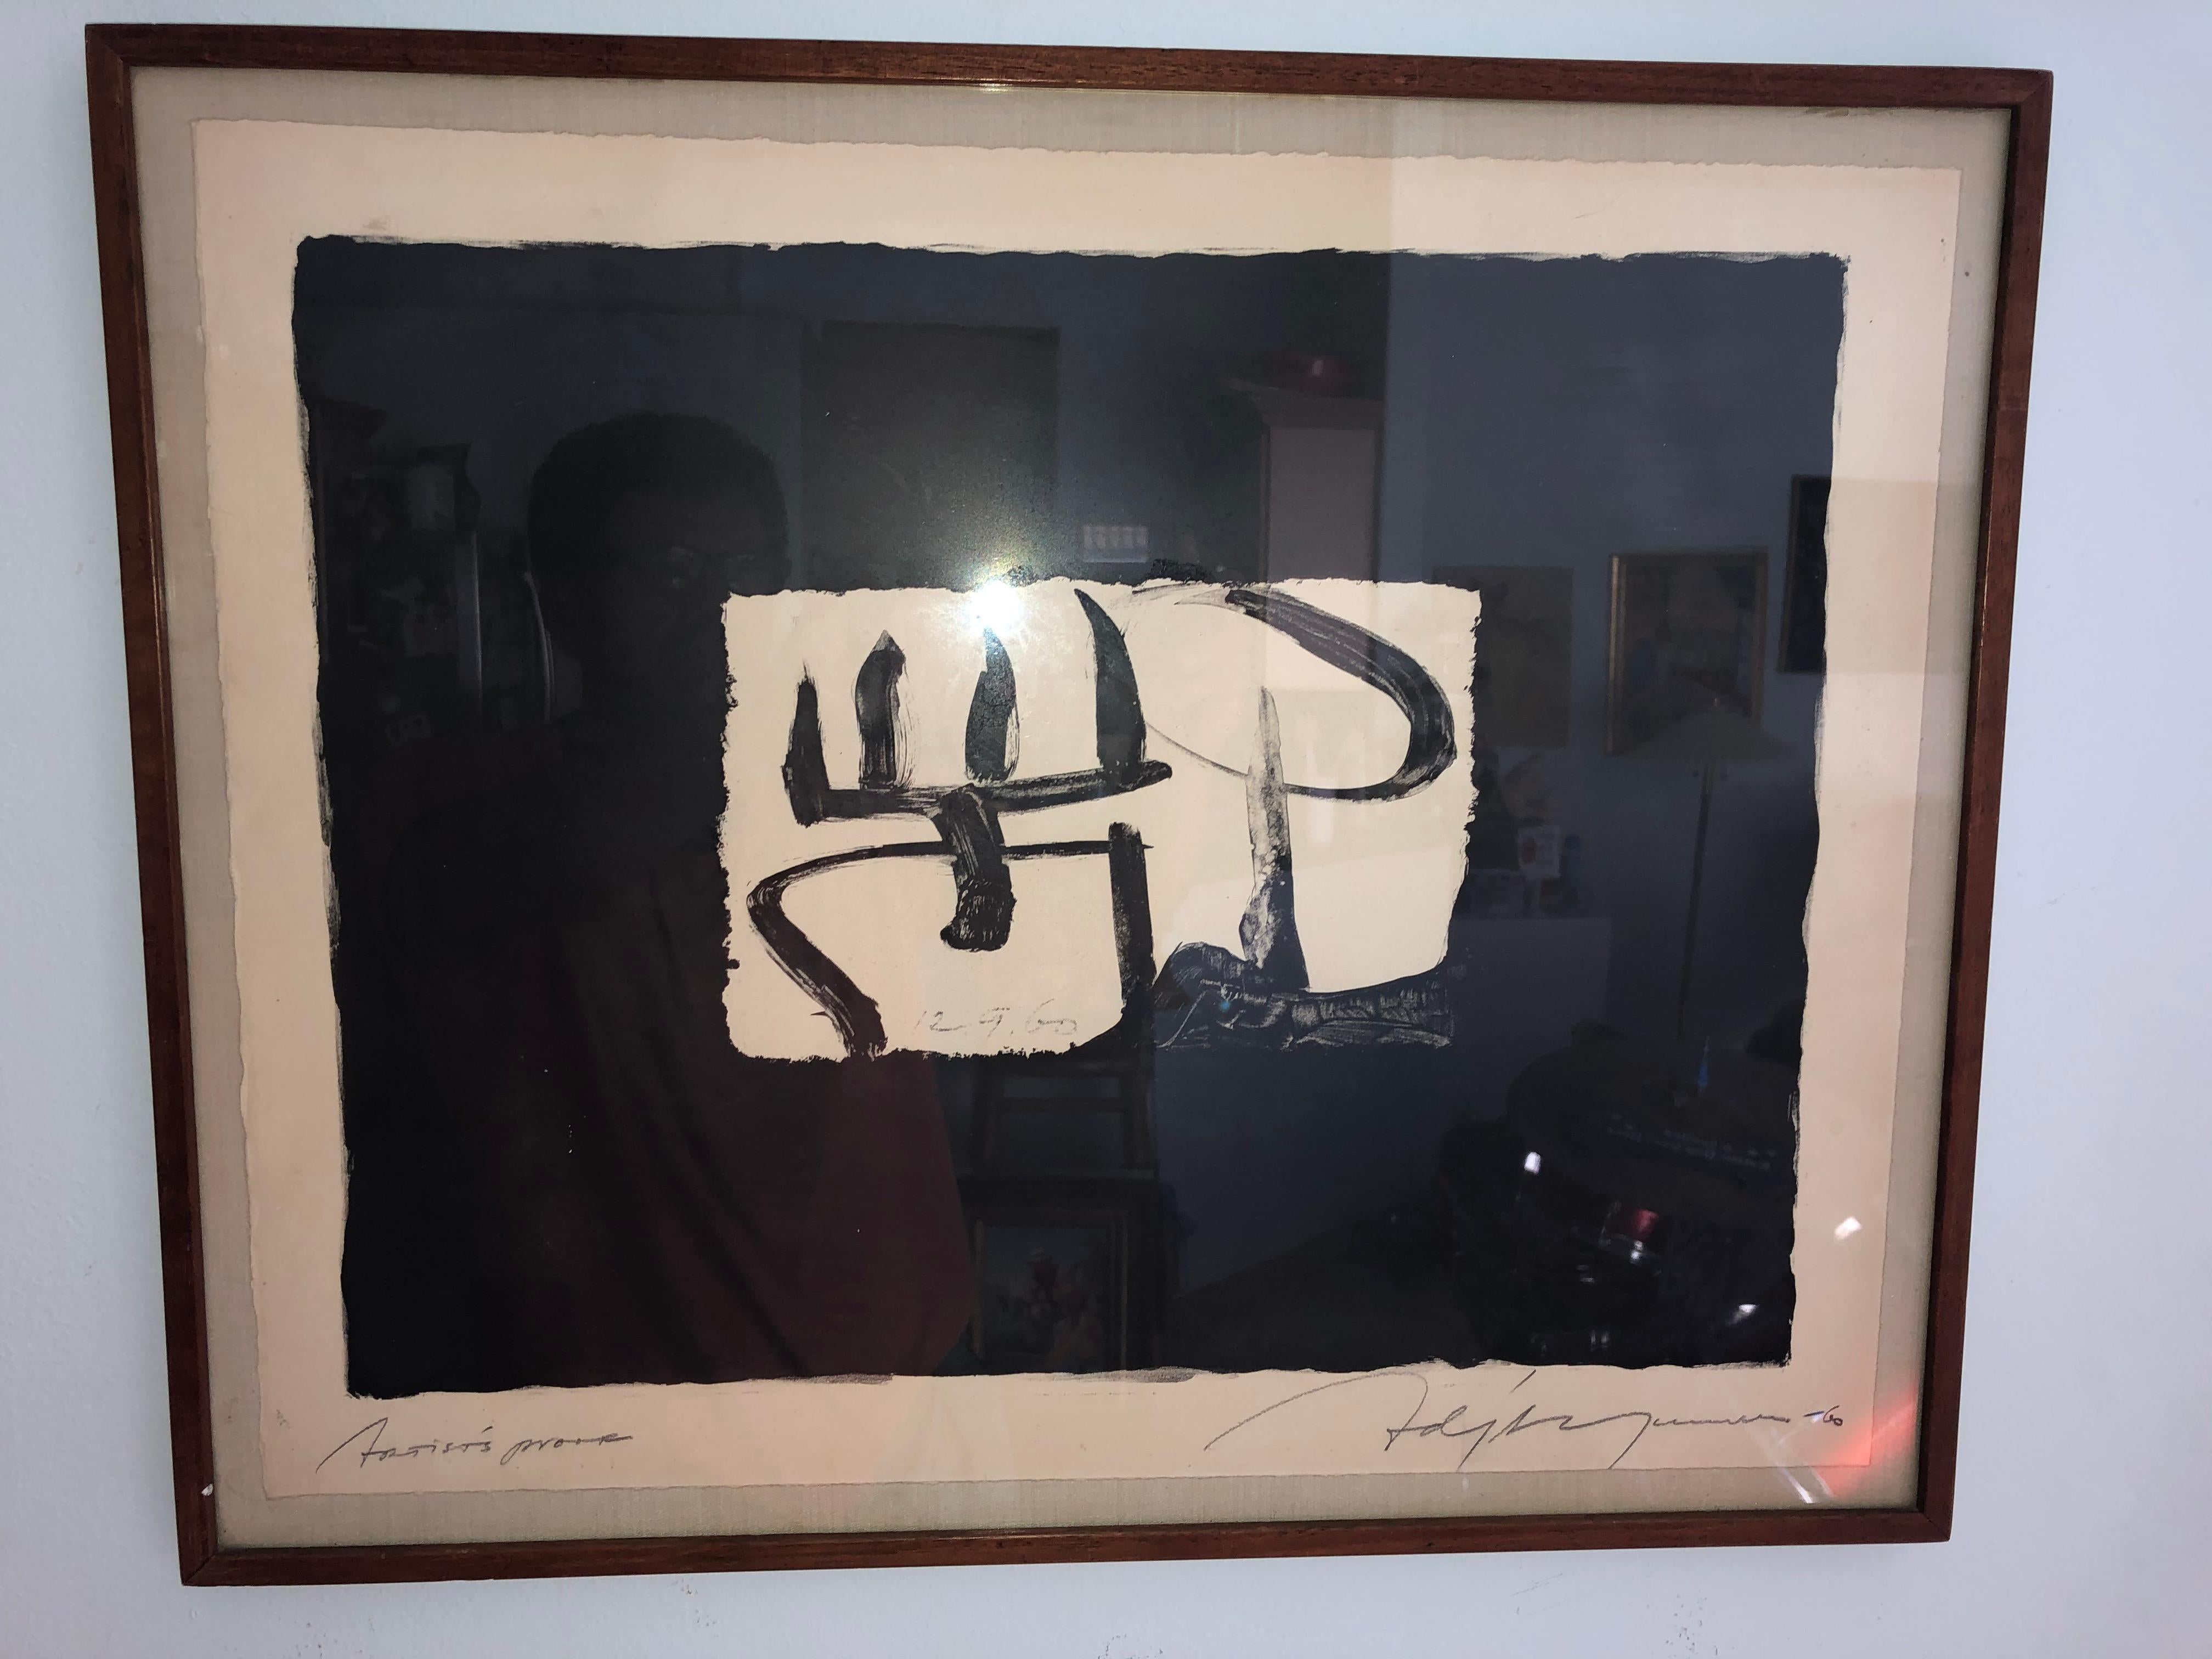 Adja Yunkers: 1900-1983. Well listed artist and printmaker. He was born in Riga Latvia and emigrated to the U.S. He is in the permanent collections of the Guggenheim and Museum of Modern Art amongst others. This actual piece was lent out to